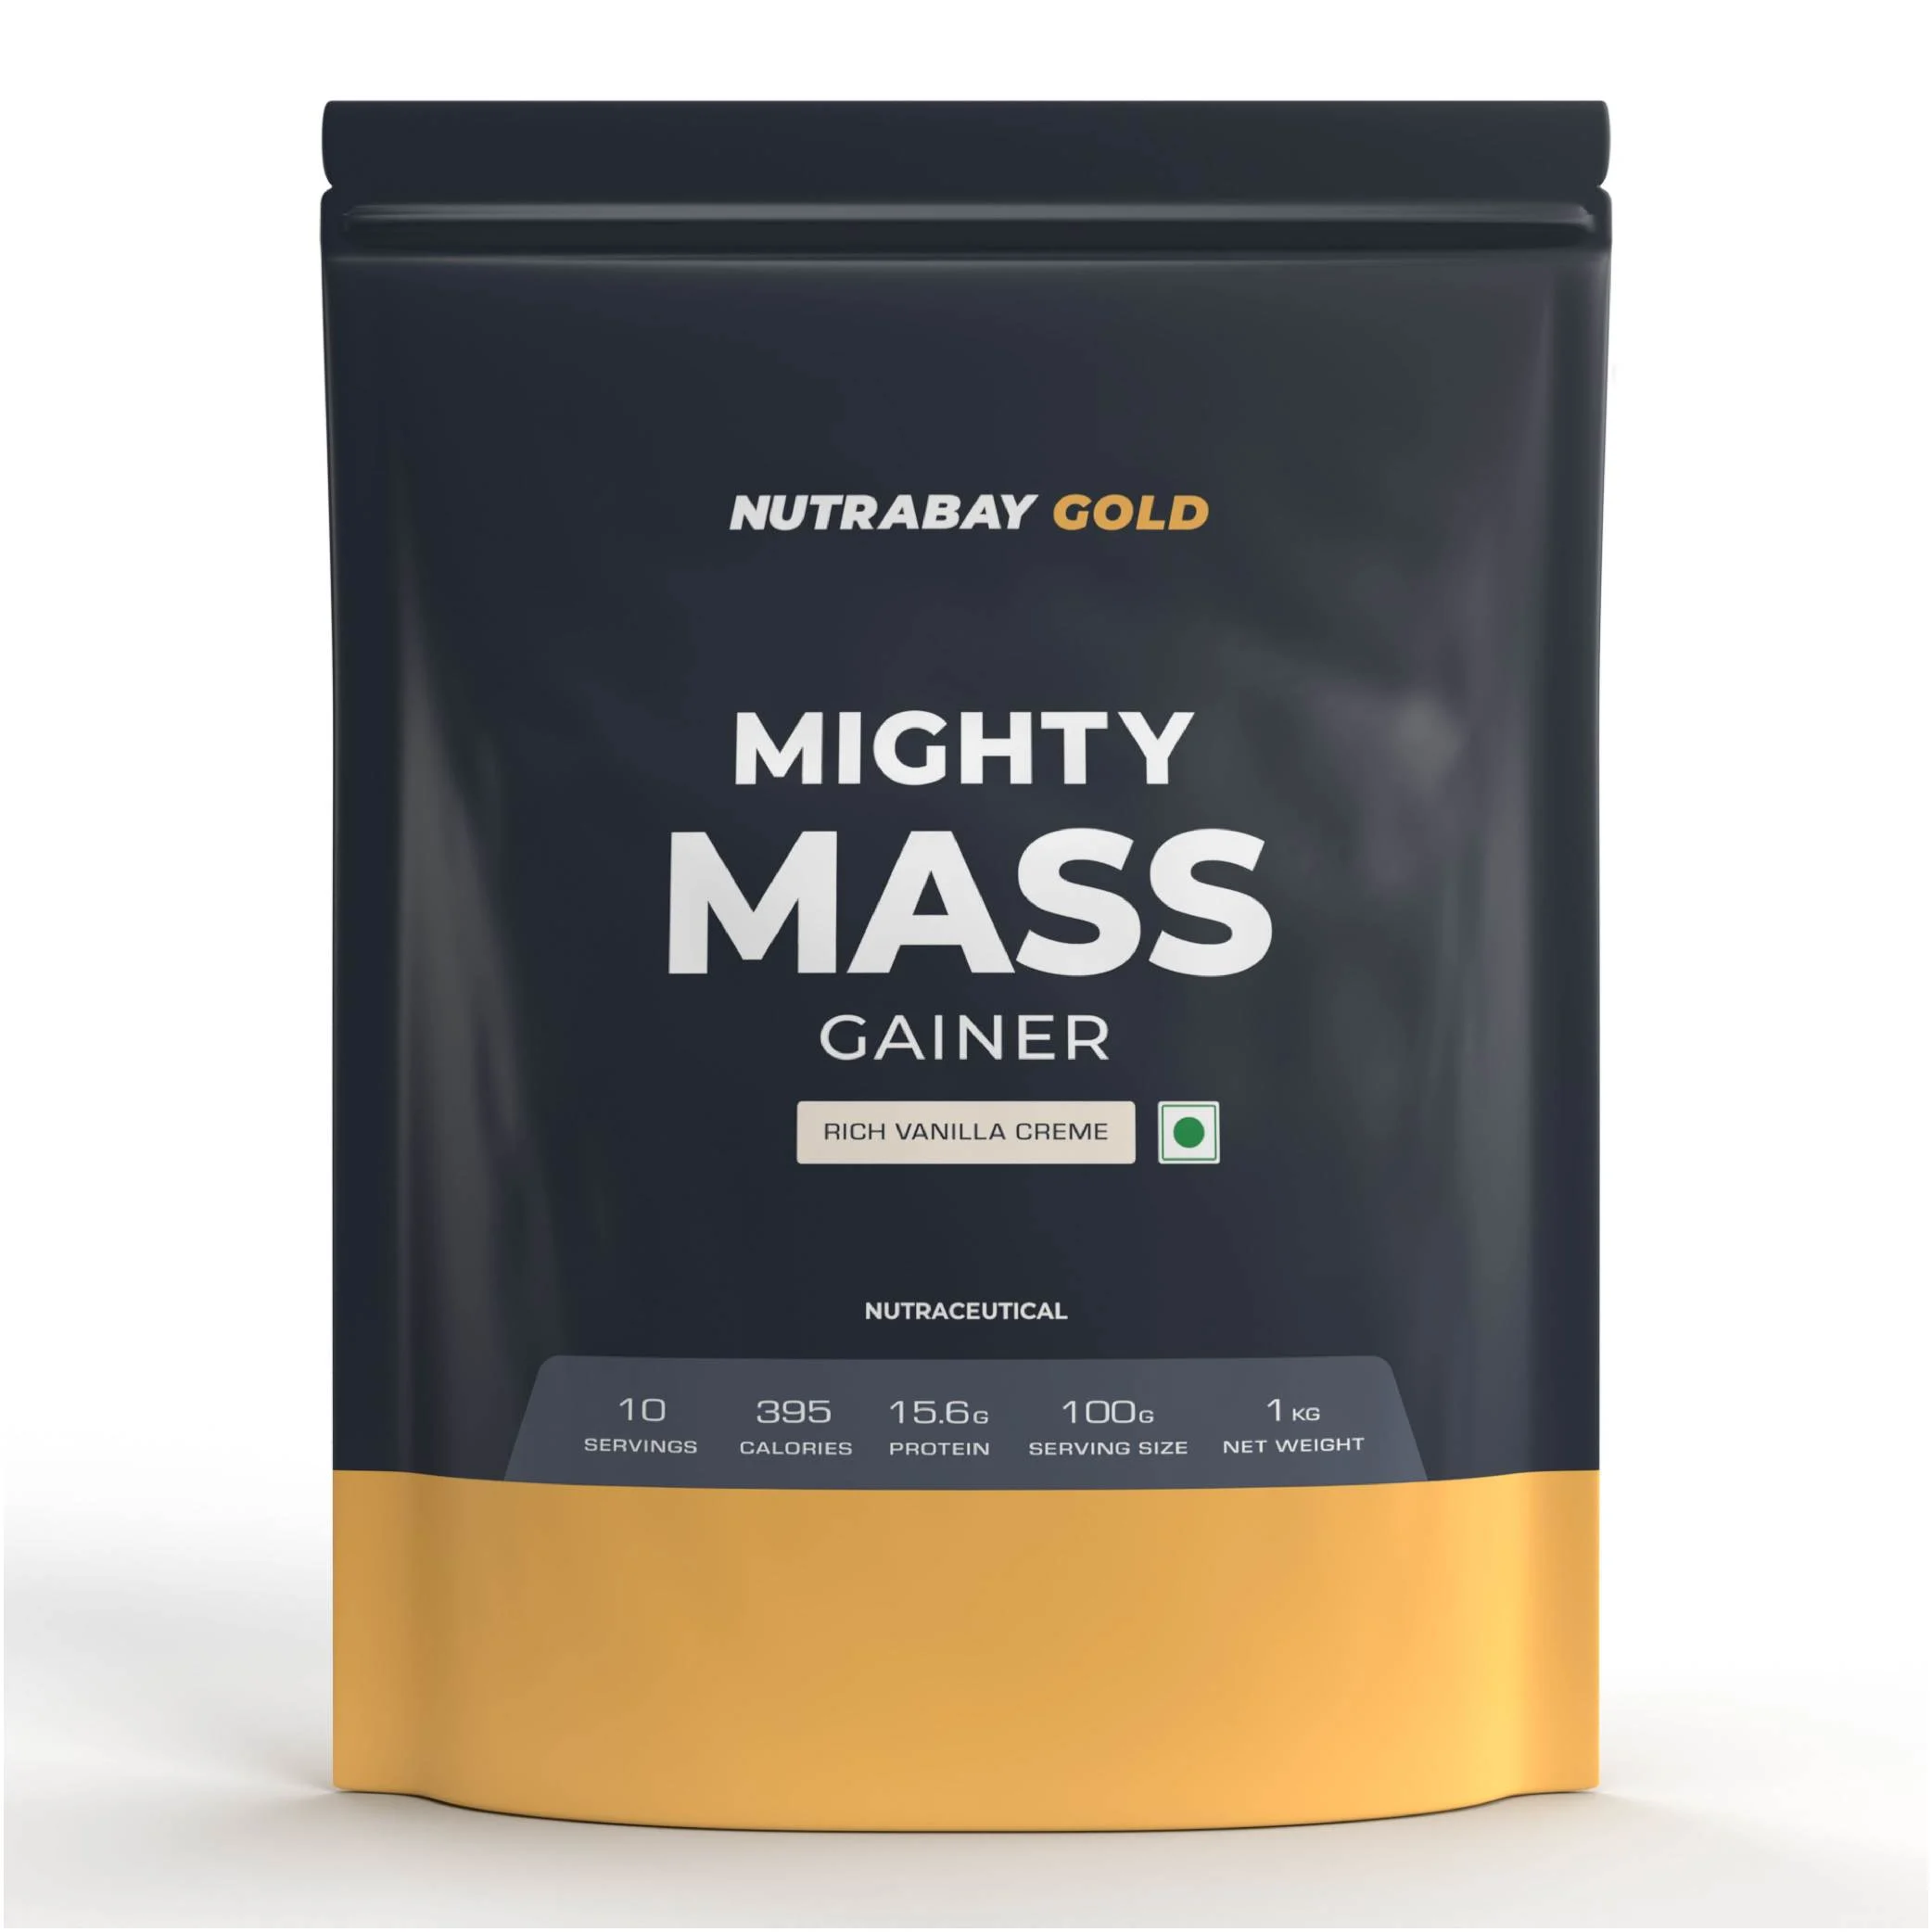 Nutrabay Gold Mighty Mass Weight Gainer Image